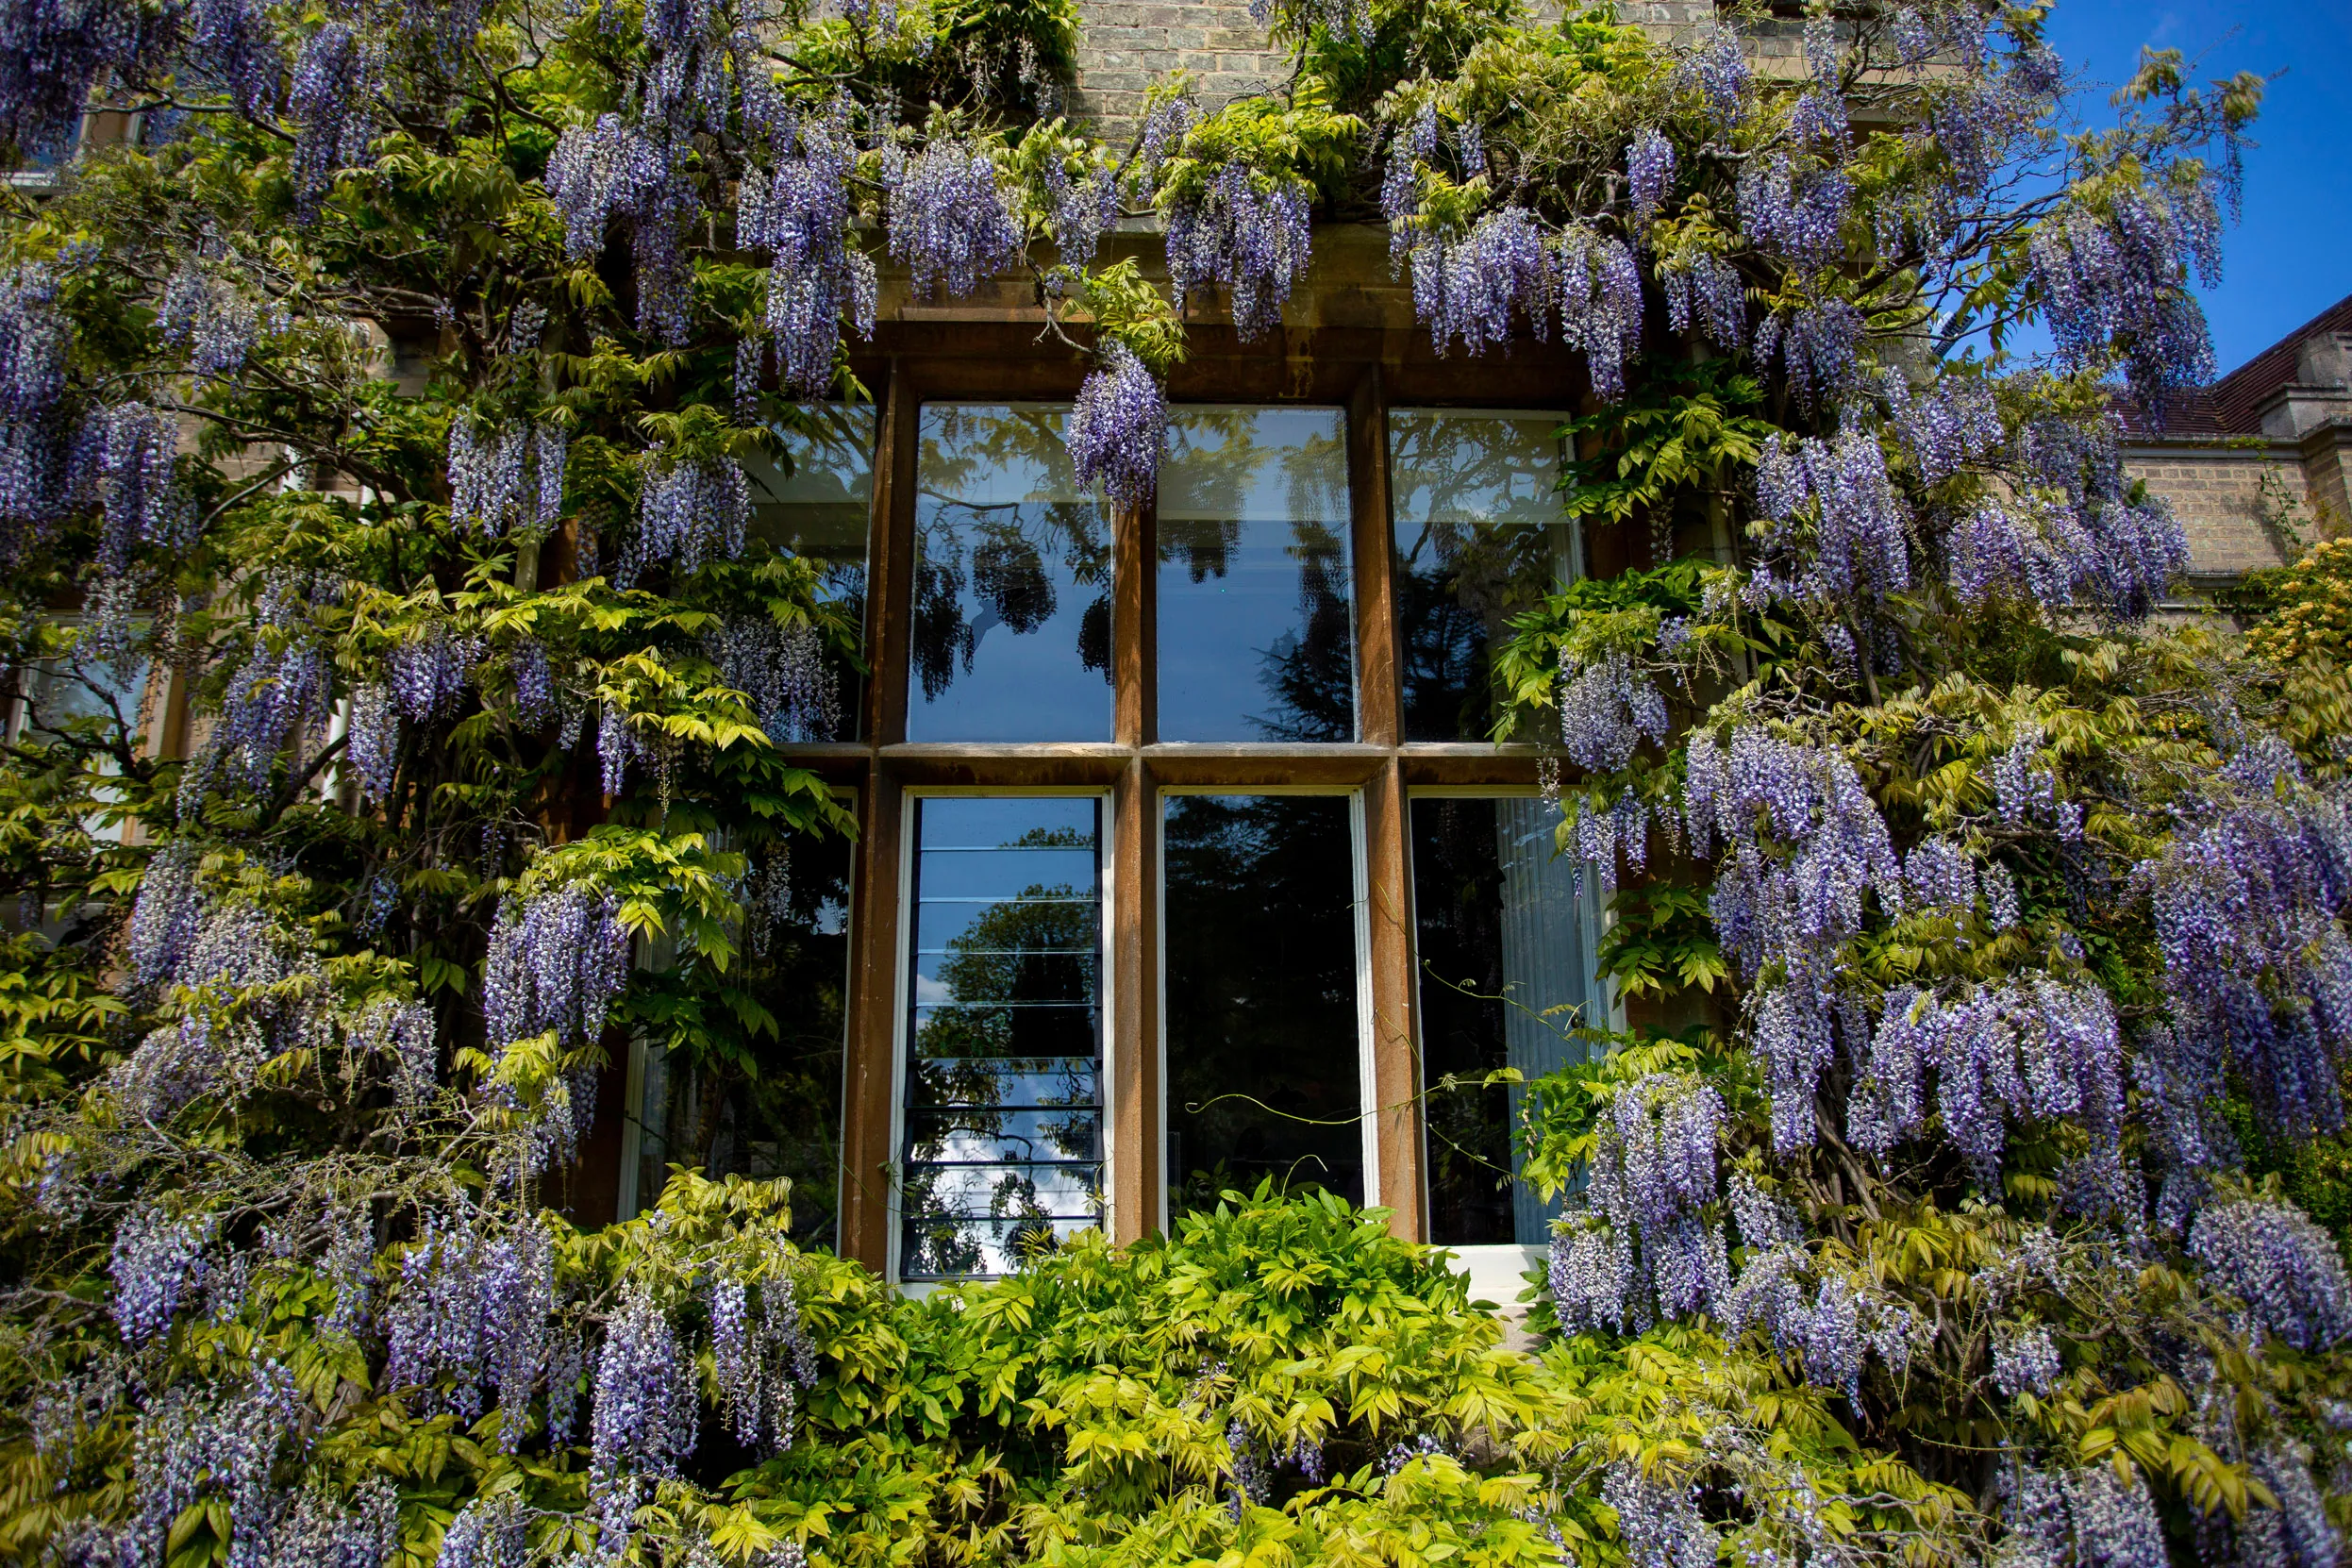 The Lodge window surrounded by purple Wisteria.